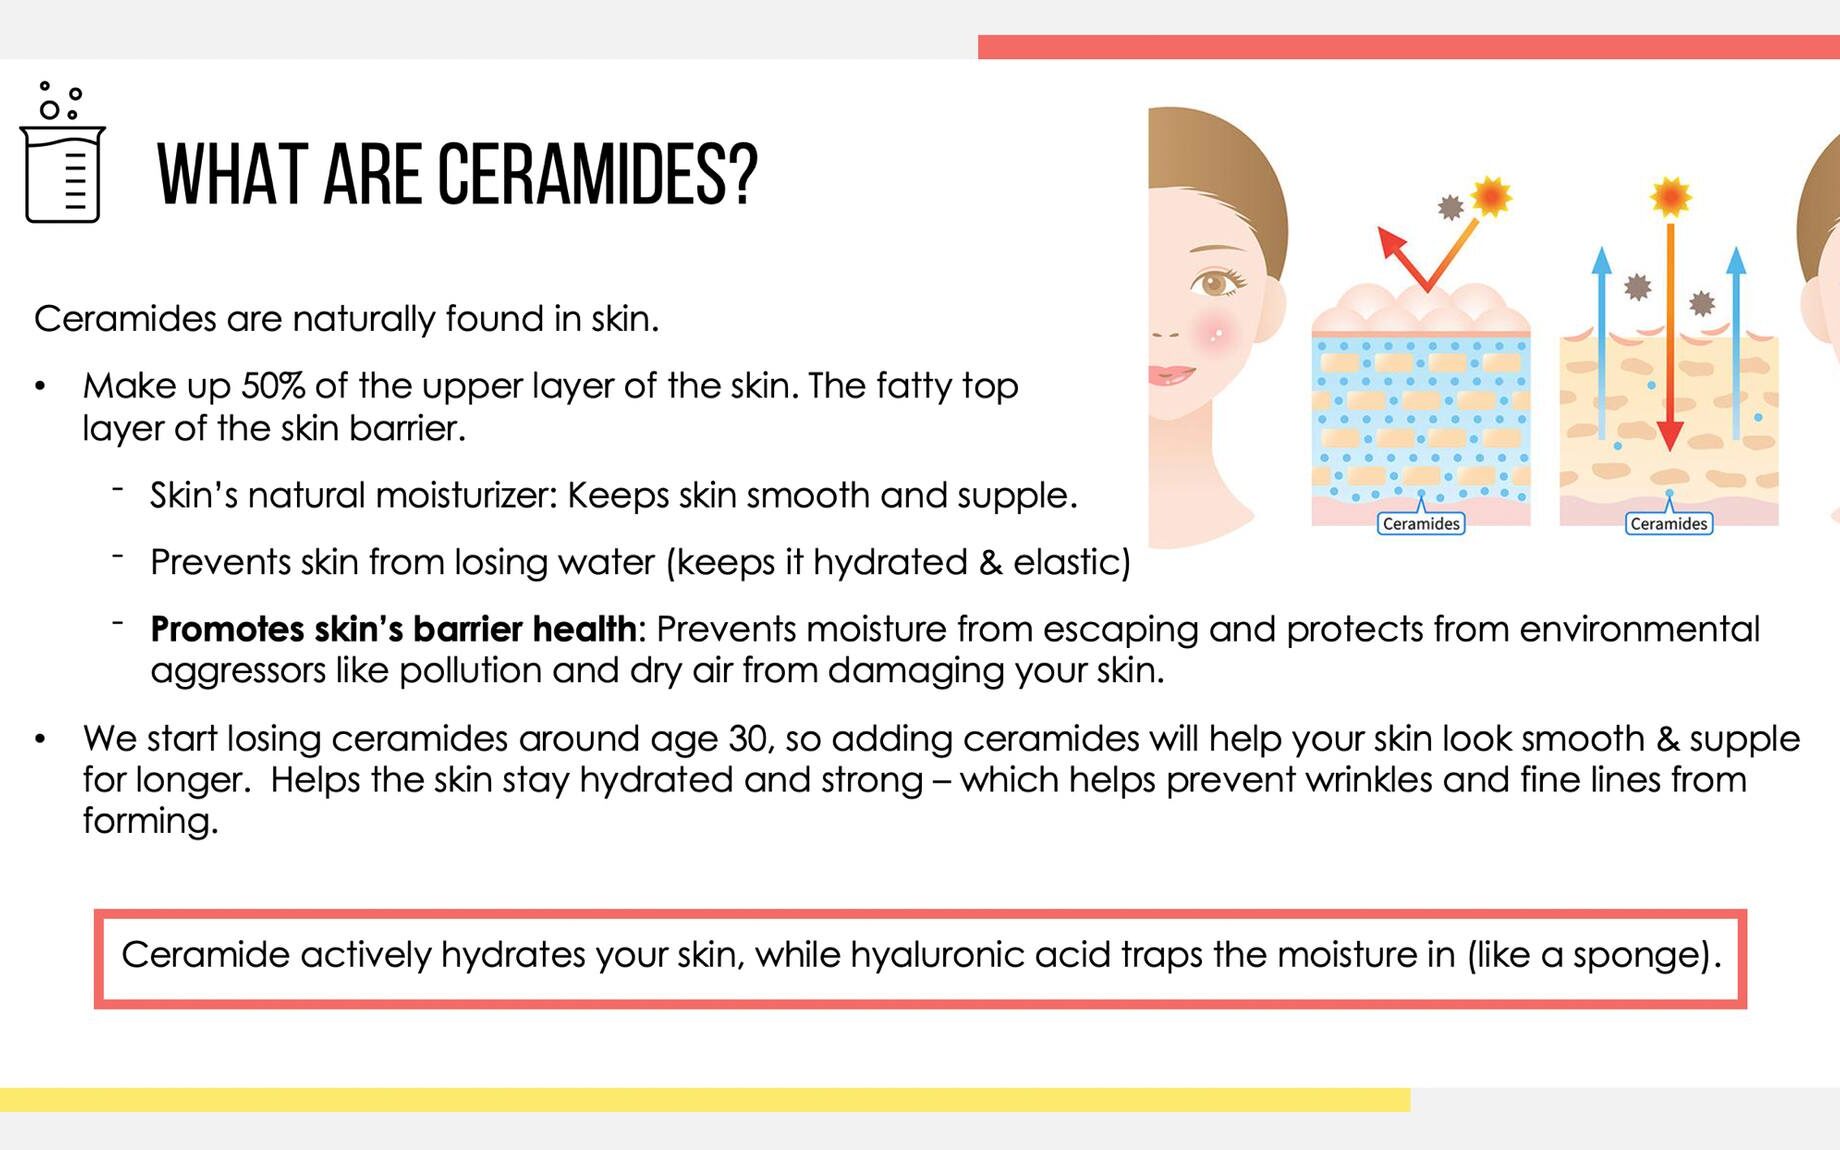 What are Ceramides? Ceramides actively hydrate your skin, and hyaluronic acid traps the moisture in like a sponge!